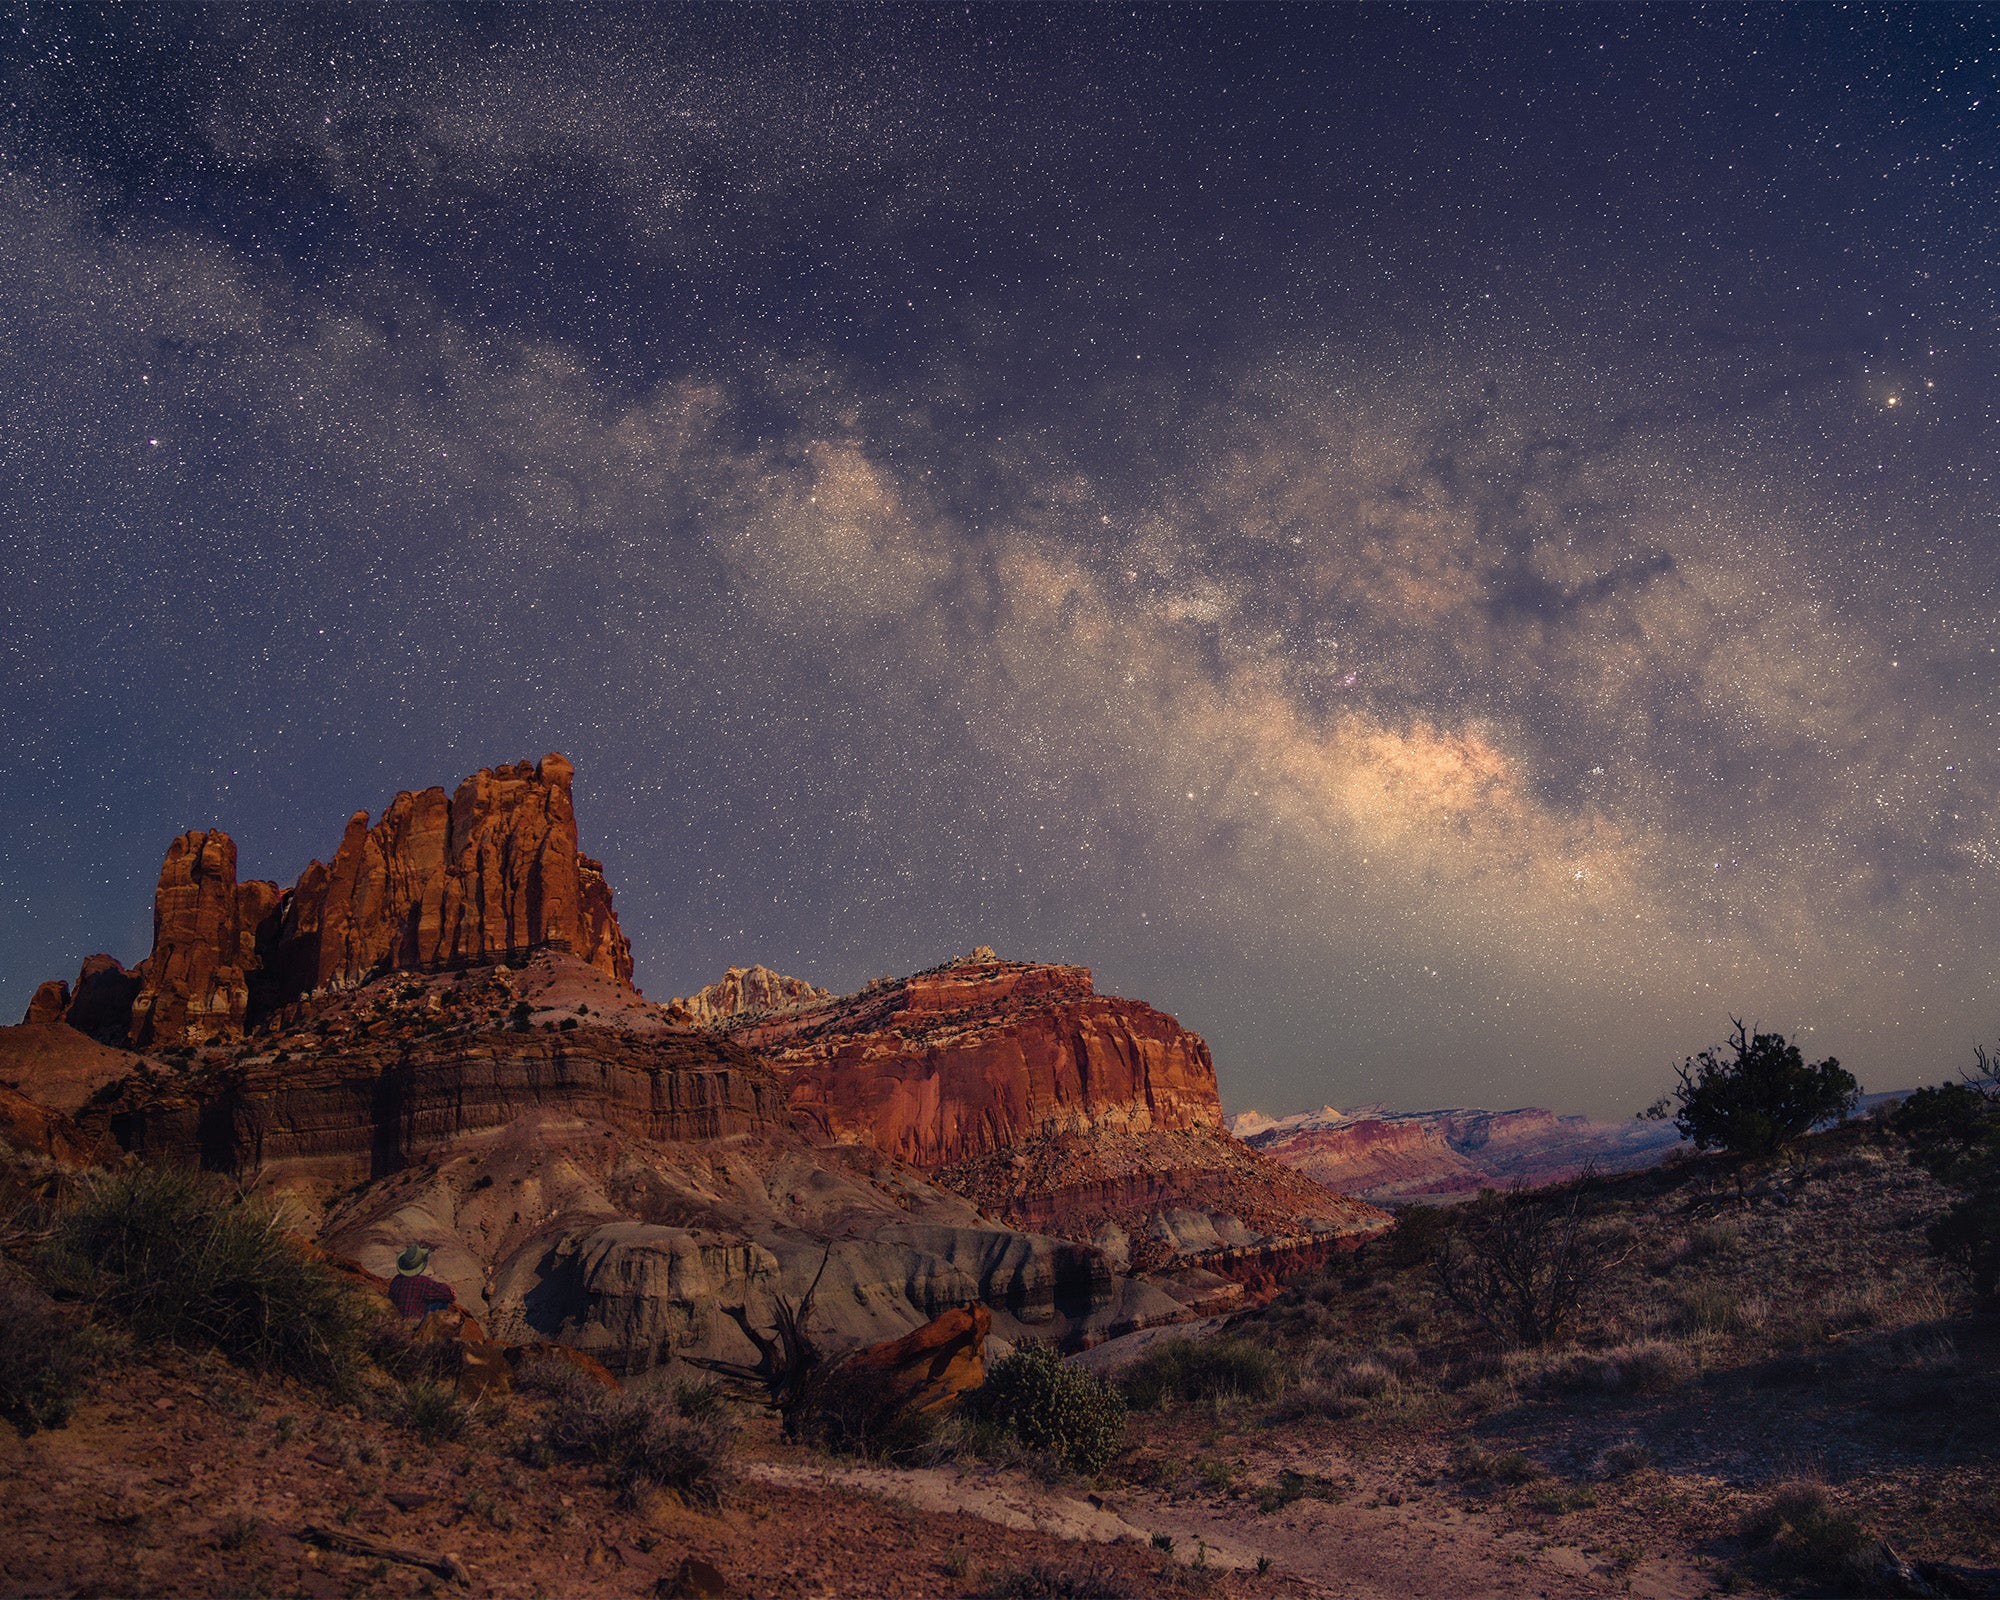 The Milky Way glows over the red cliffs of Capitol Reef National Park while a person sits and glories in the view.